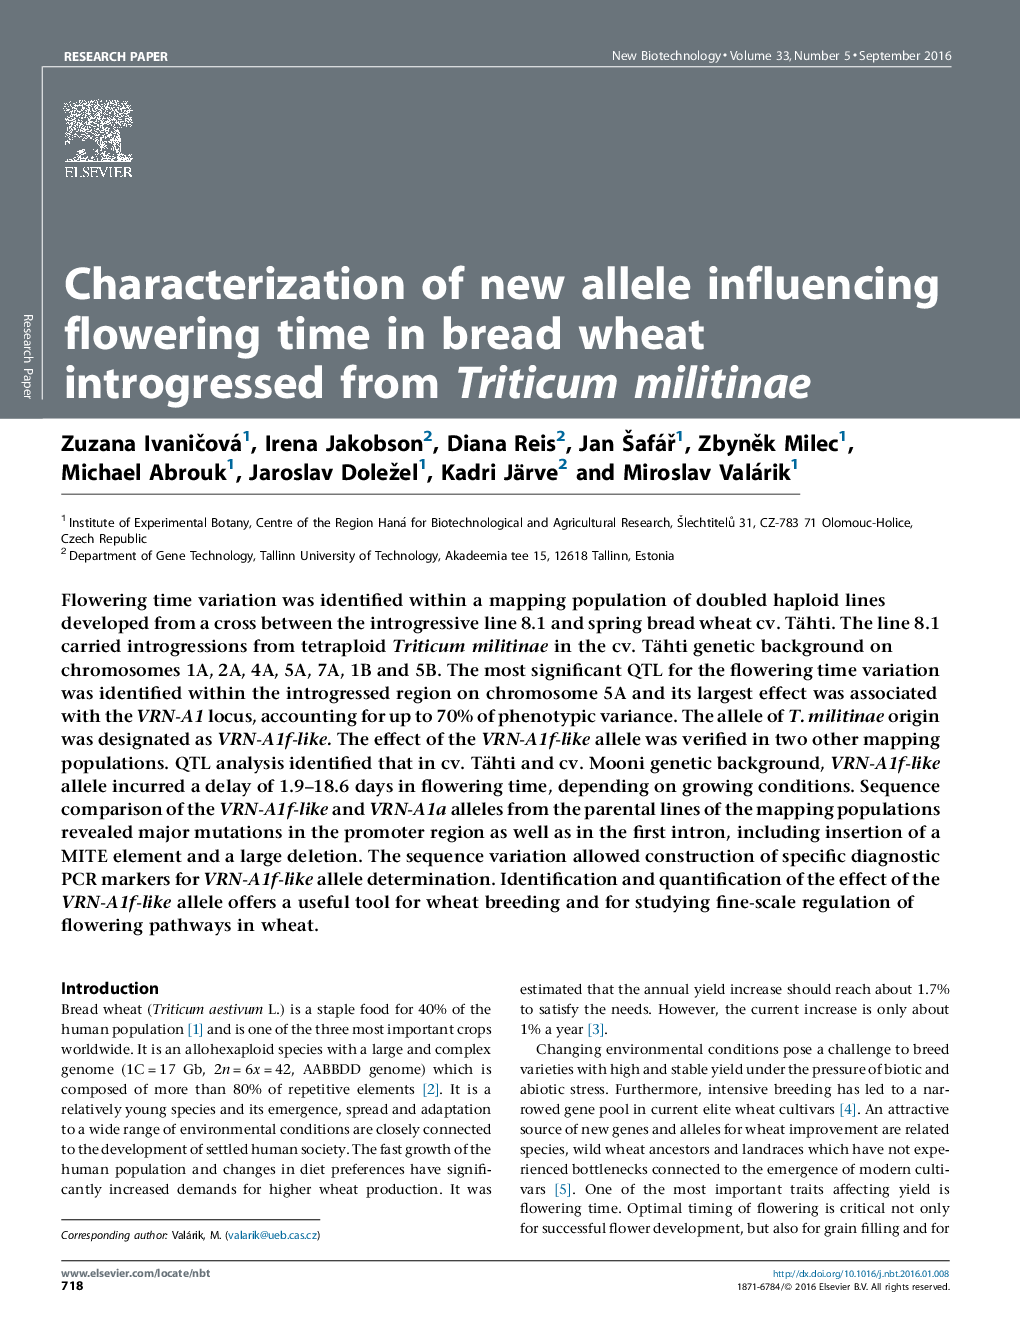 Characterization of new allele influencing flowering time in bread wheat introgressed from Triticum militinae